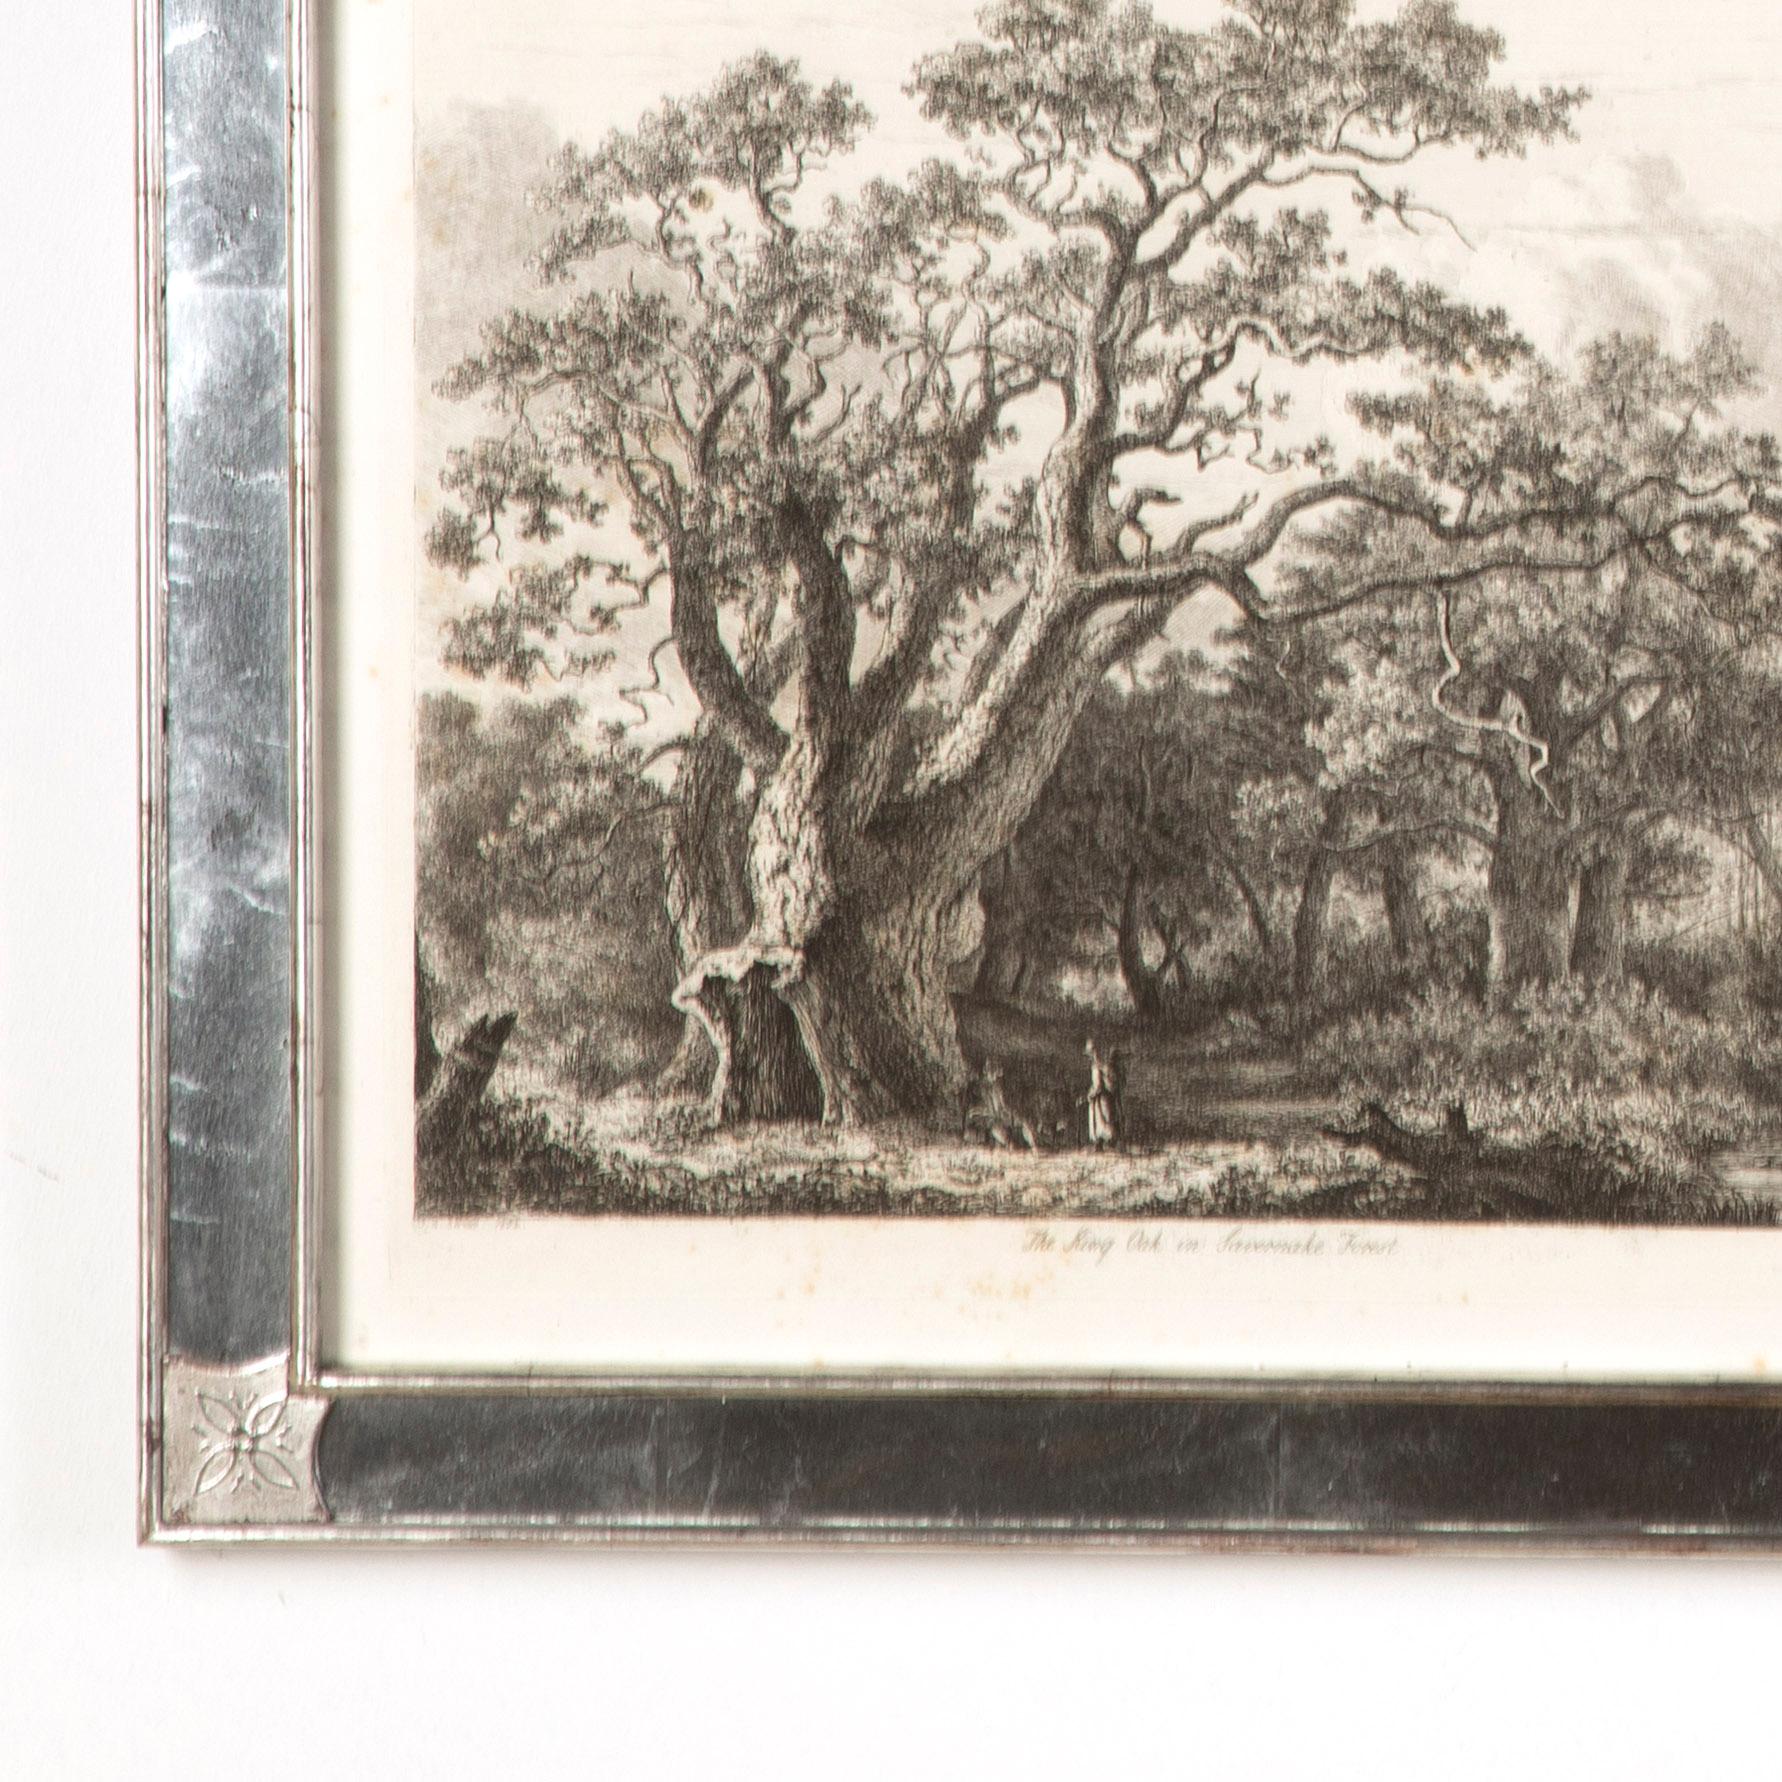 Silvered 'Portraits of Forest Trees' Engravings by Jacob George Strut